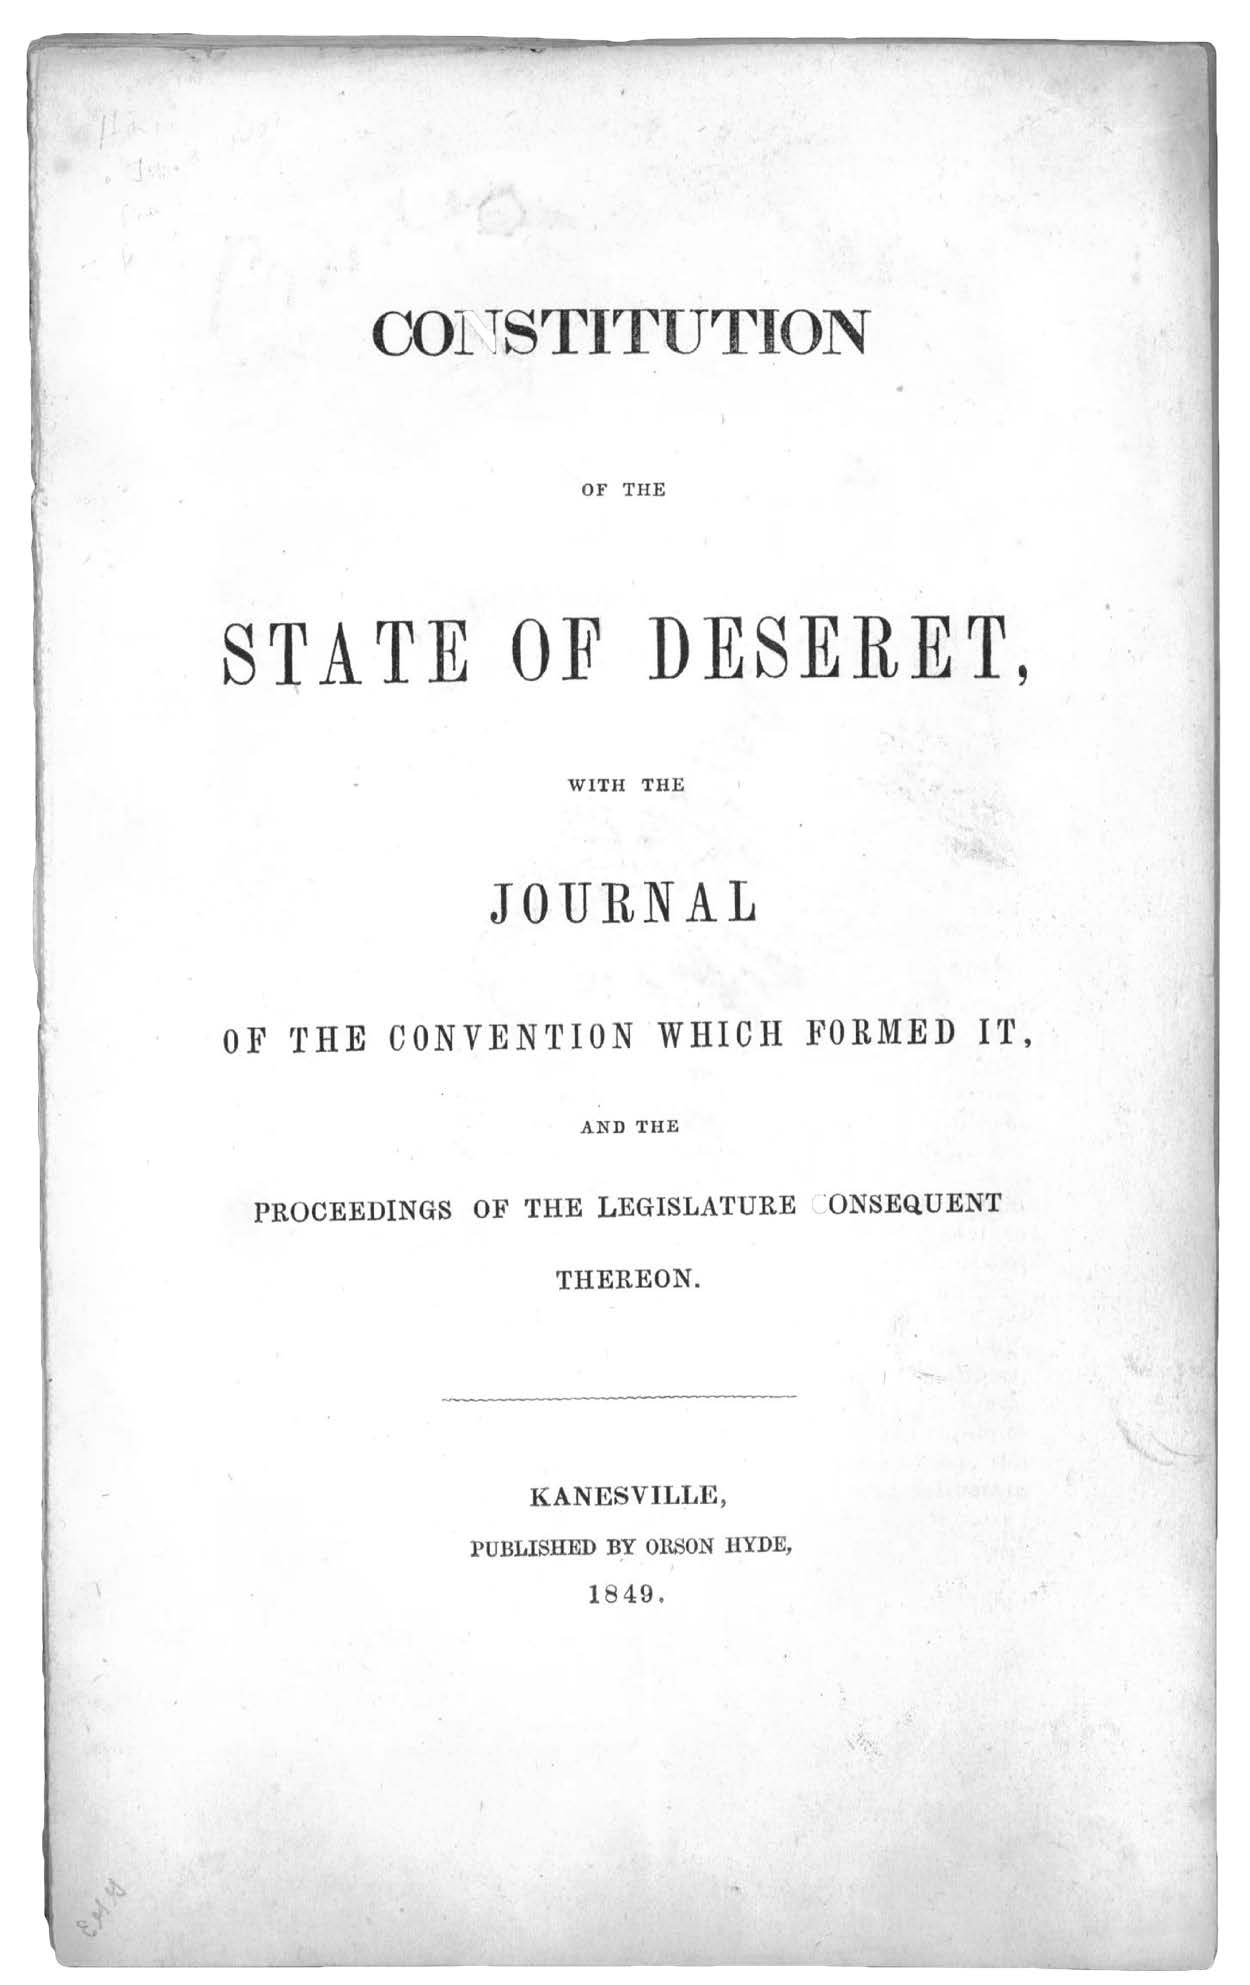 The Constitution of the State of Deseret gave formal structure to the “living constitution” of the Council of Fifty’s theodemocracy, protecting the new Zion in the West. Image courtesy of Harold B. Lee Library Digital Collections, BYU.